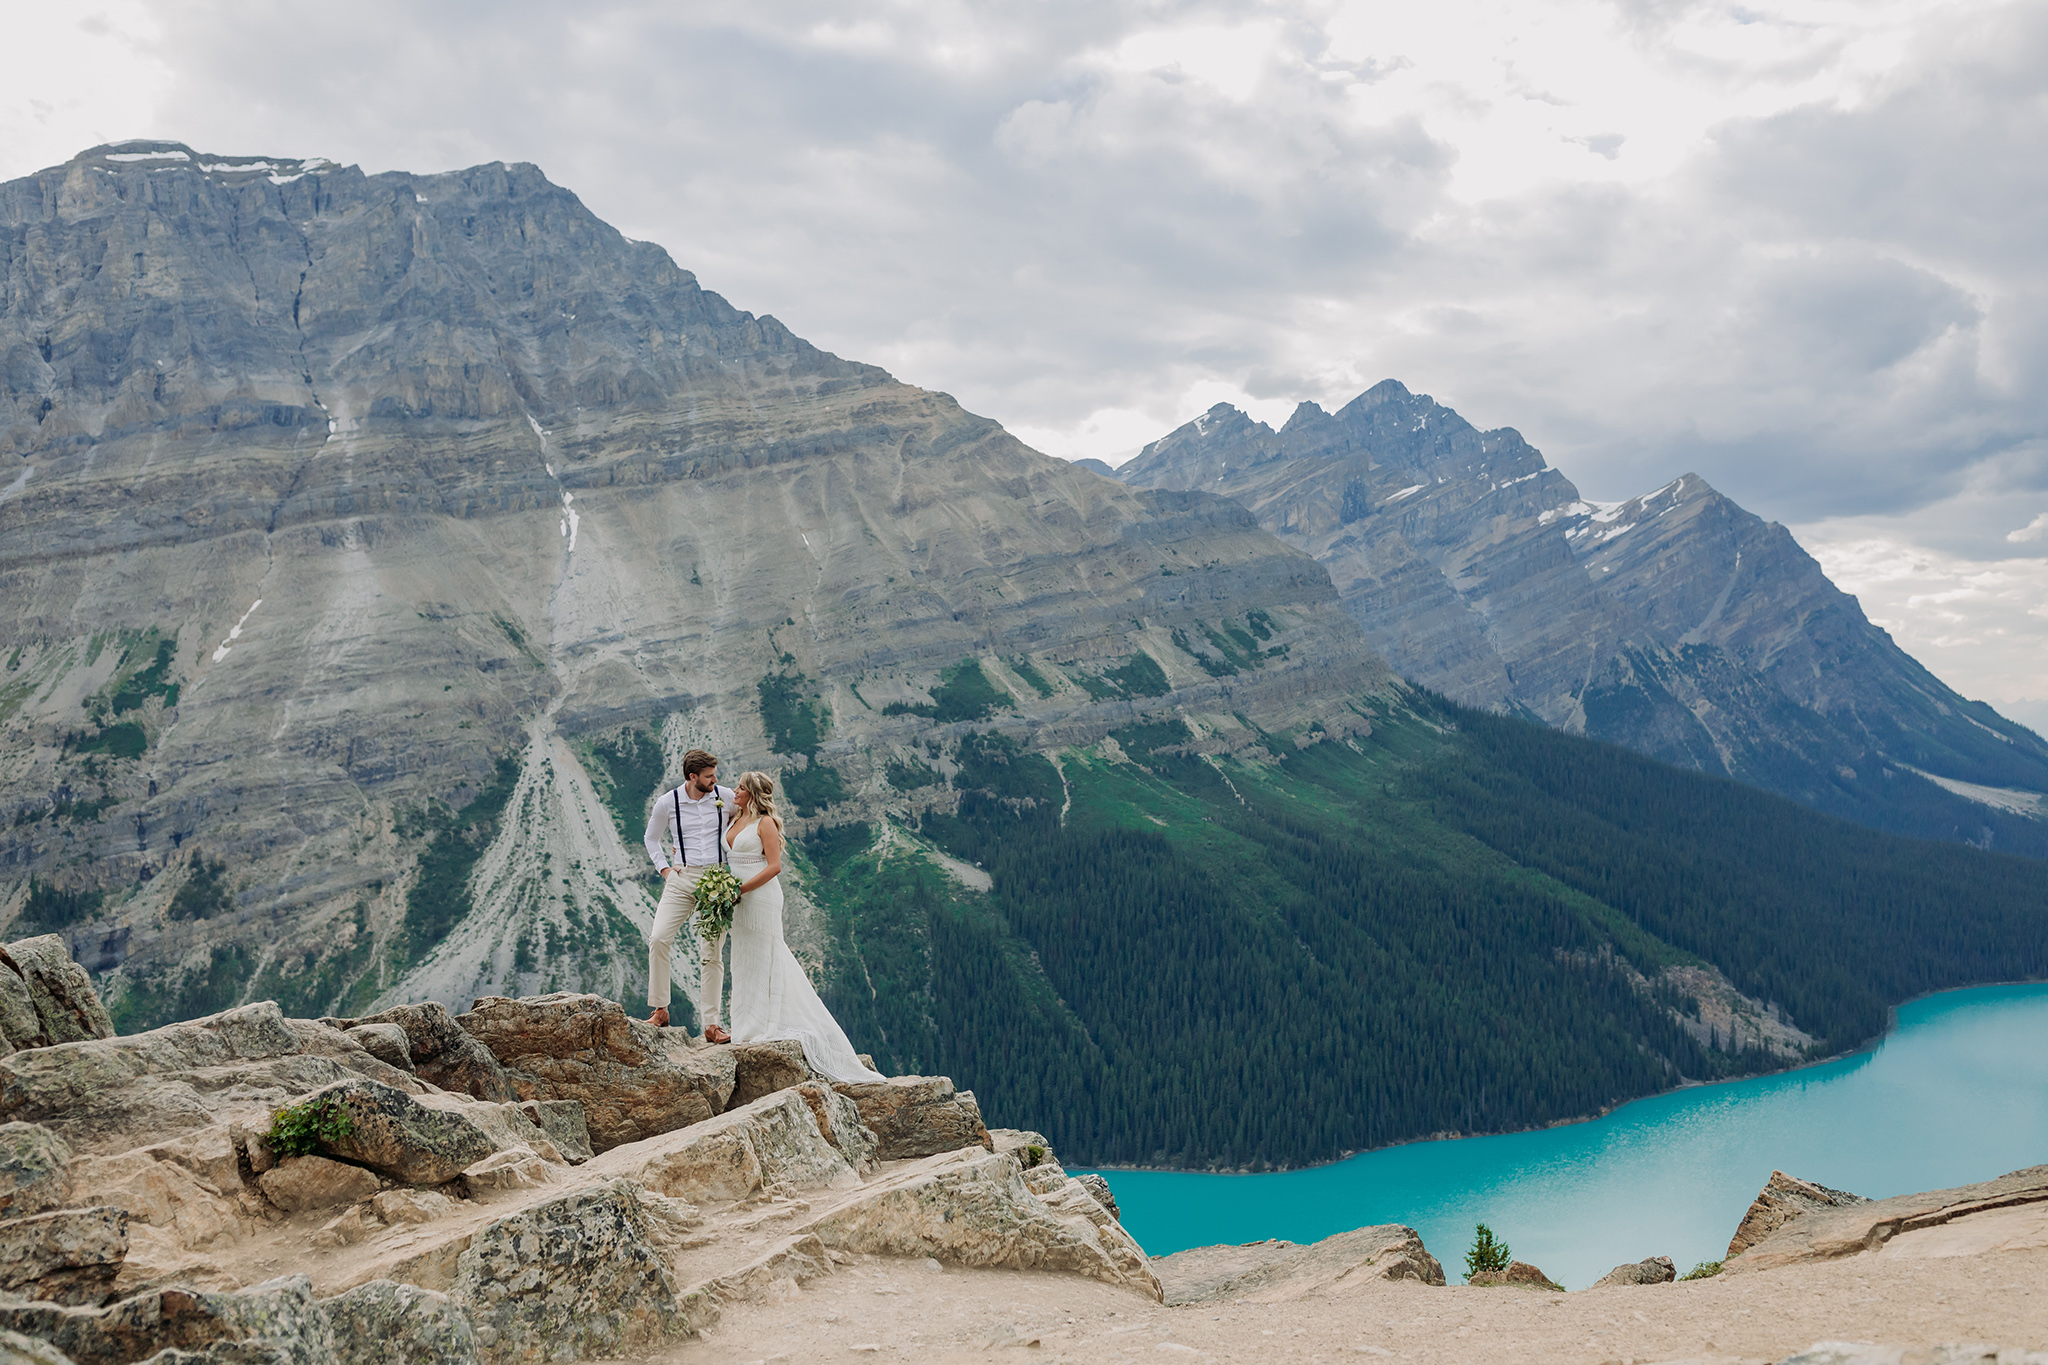 Peyto Lake Intimate wedding portraits on Icefields Parkway surrounded by Mountains overlooking blue mountain Lake in the summer photographed my ENV Photography